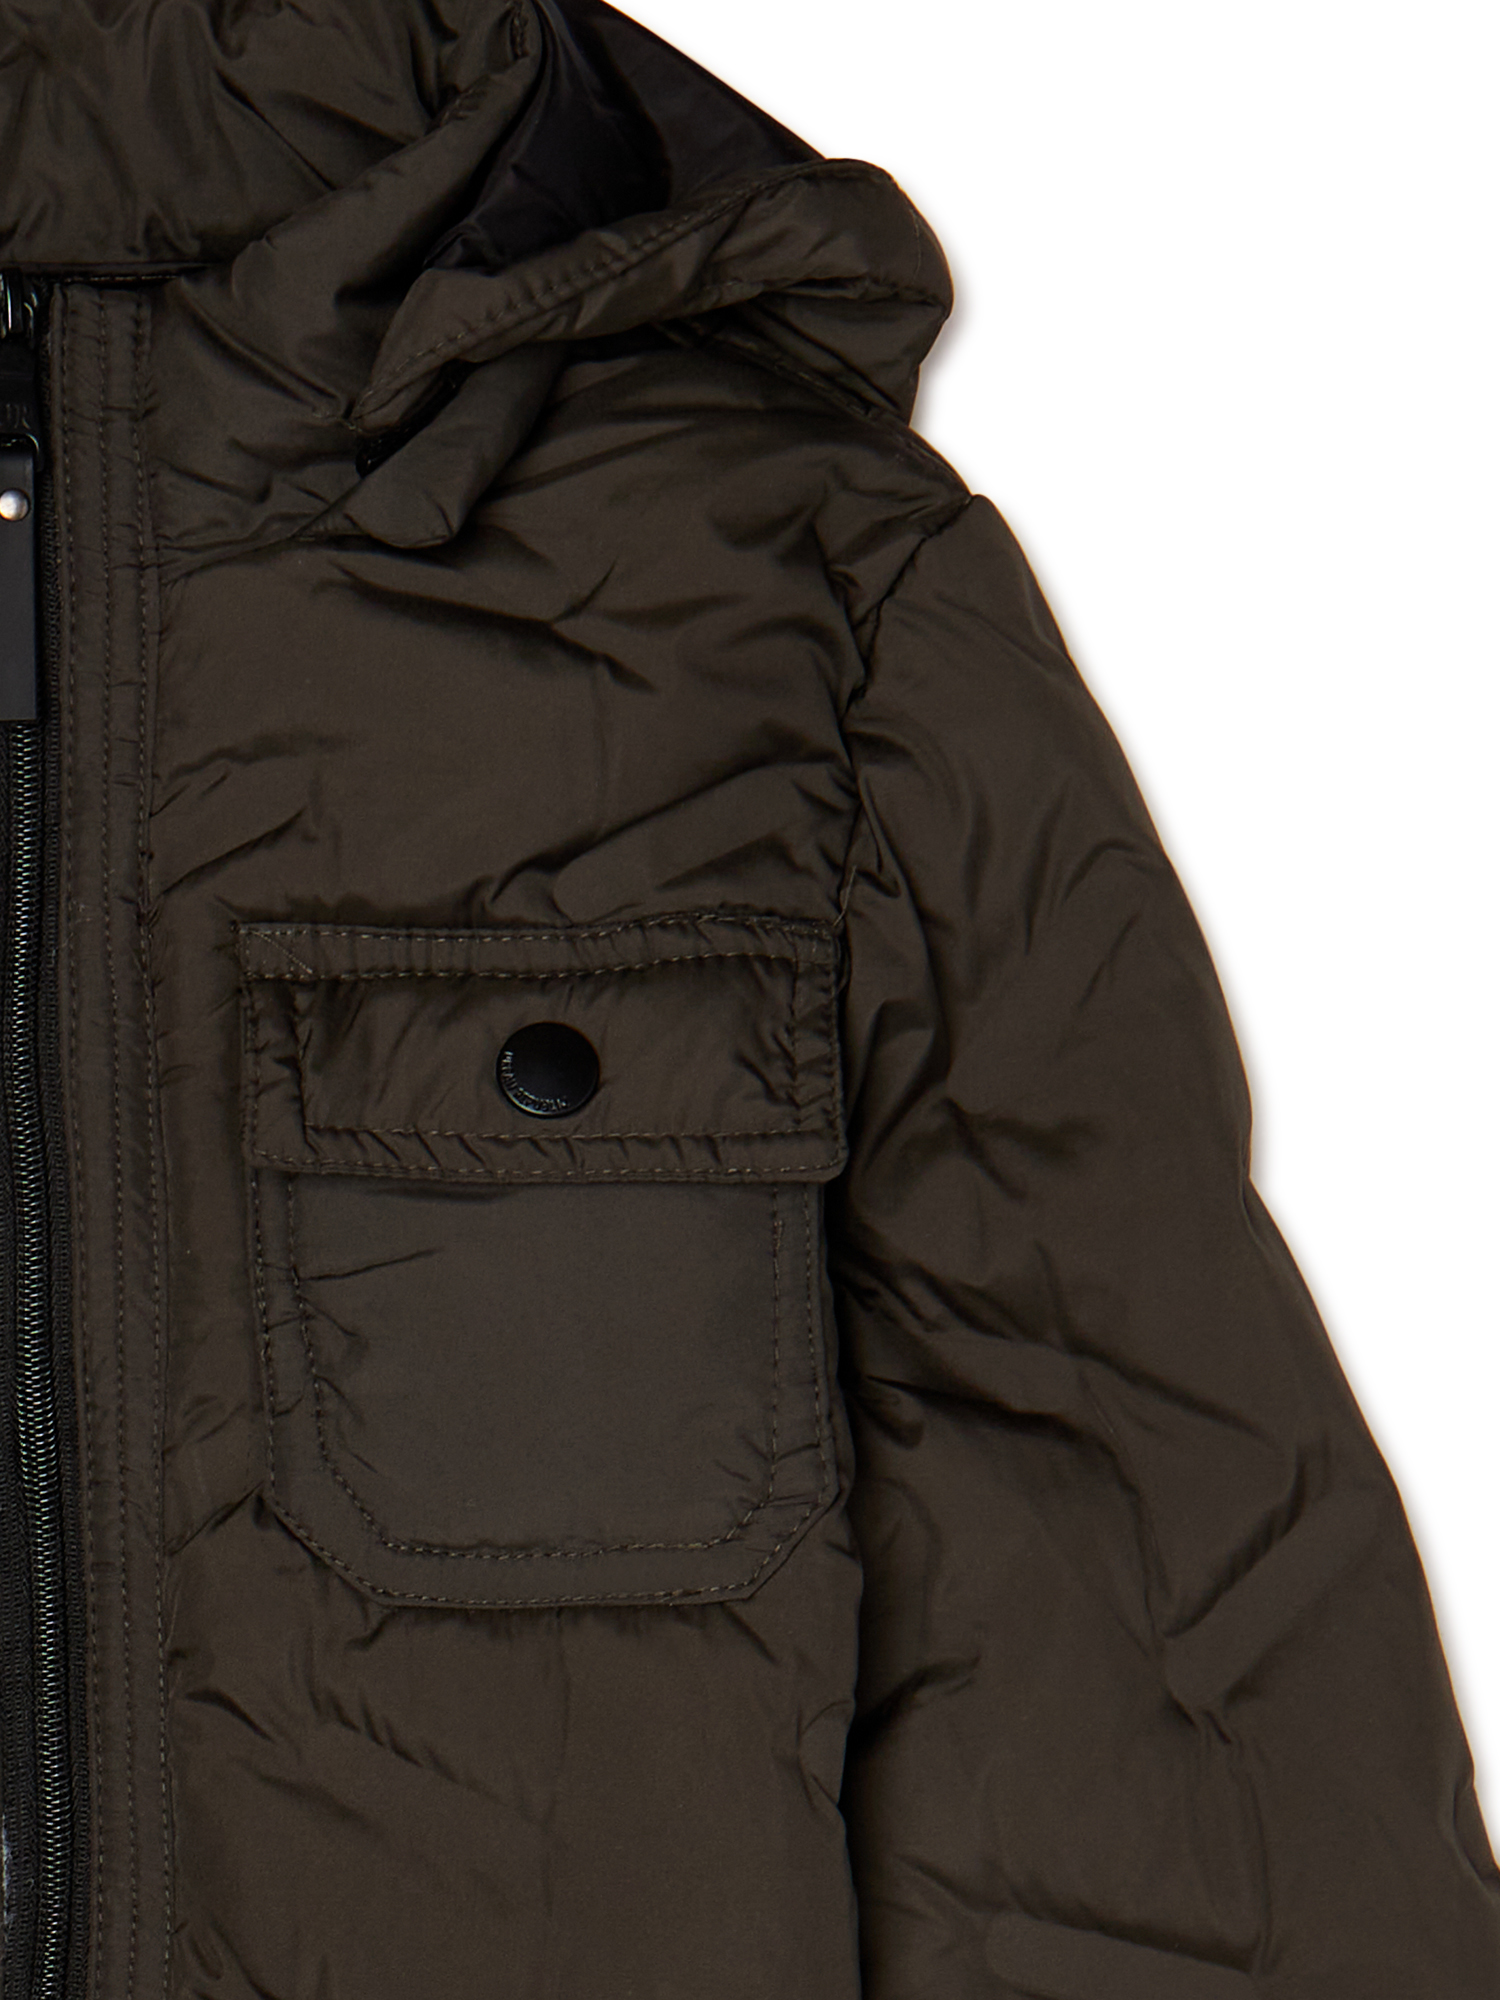 Urban Republic 'Heat Seal' Quilted Jacket with Zip Off Hood, Sizes 4-20 - image 3 of 3